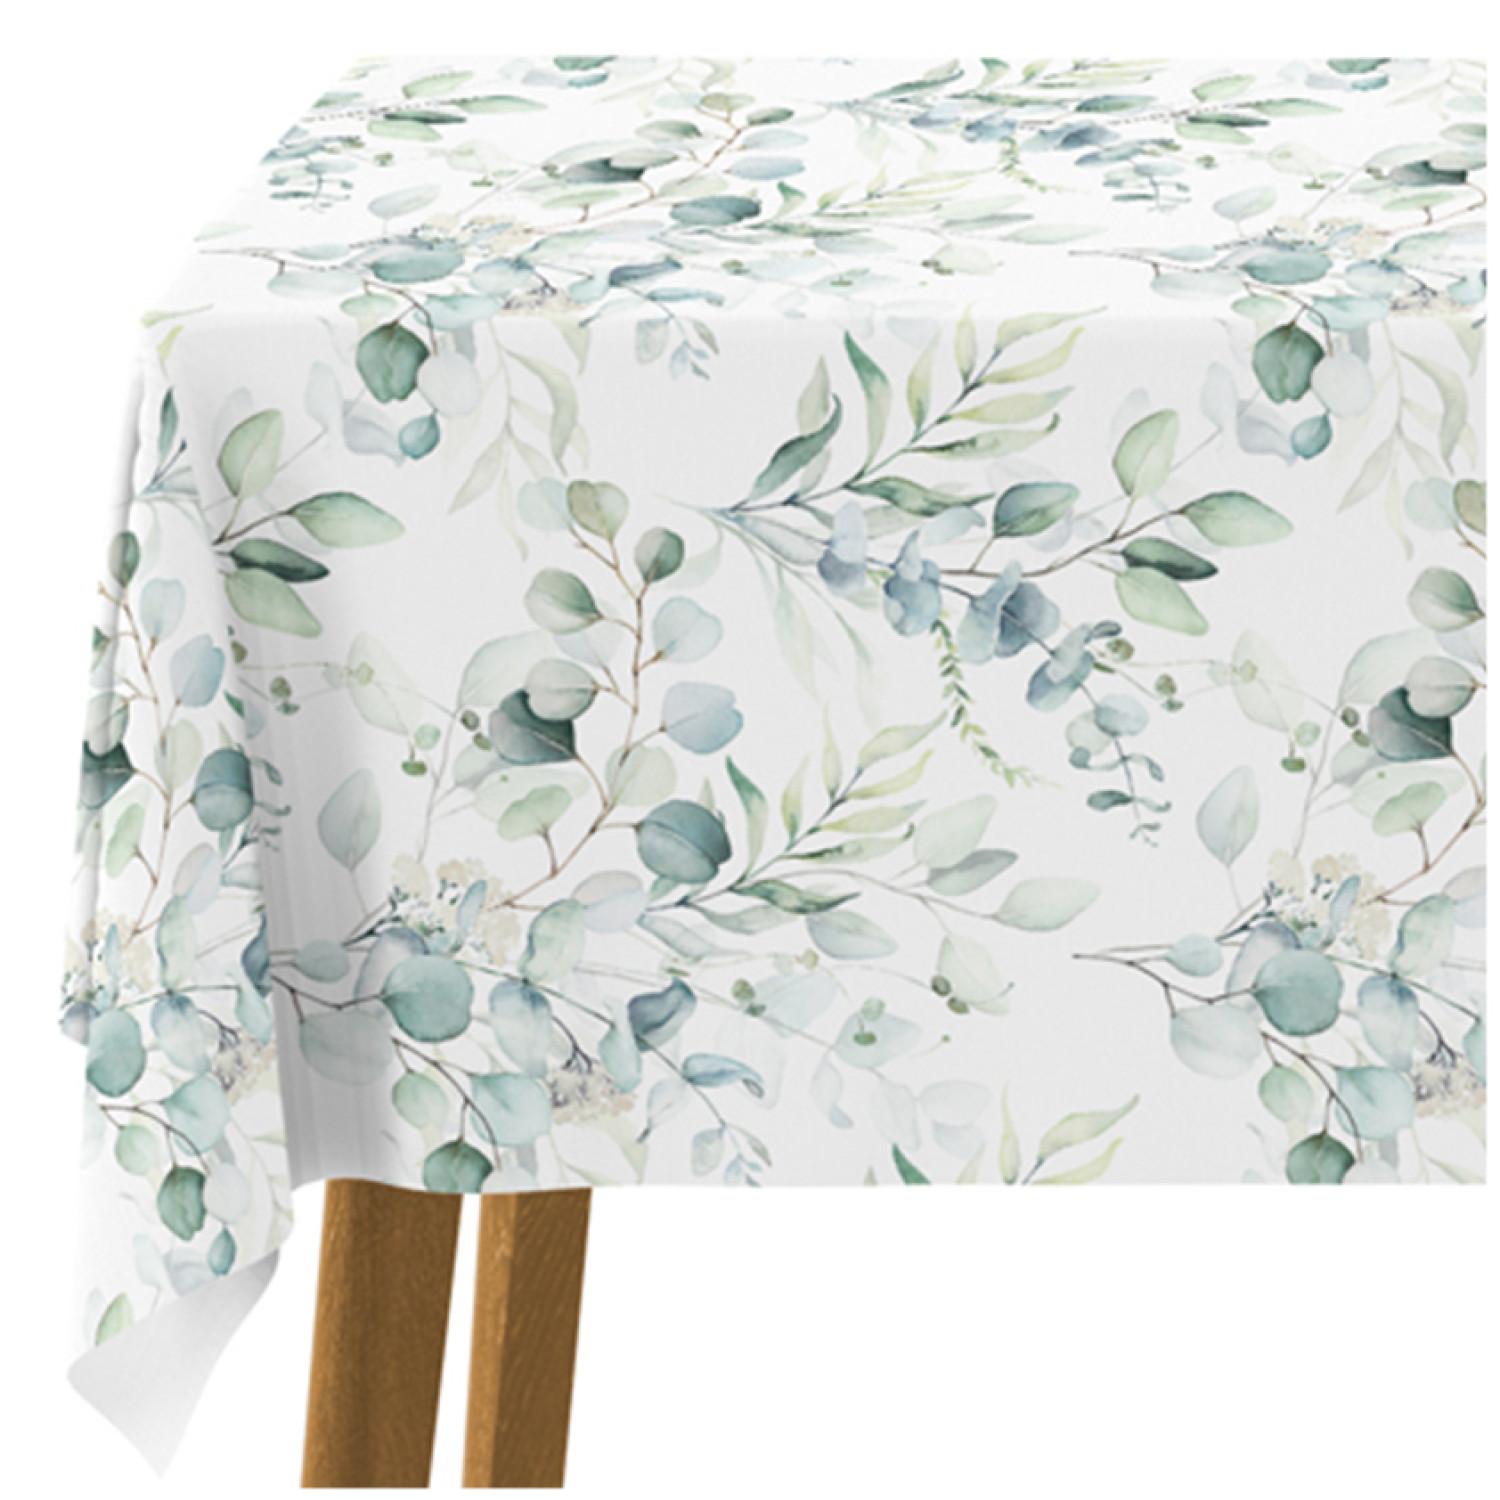 Tablecloth Little branches - composition with a plant motif on a white background